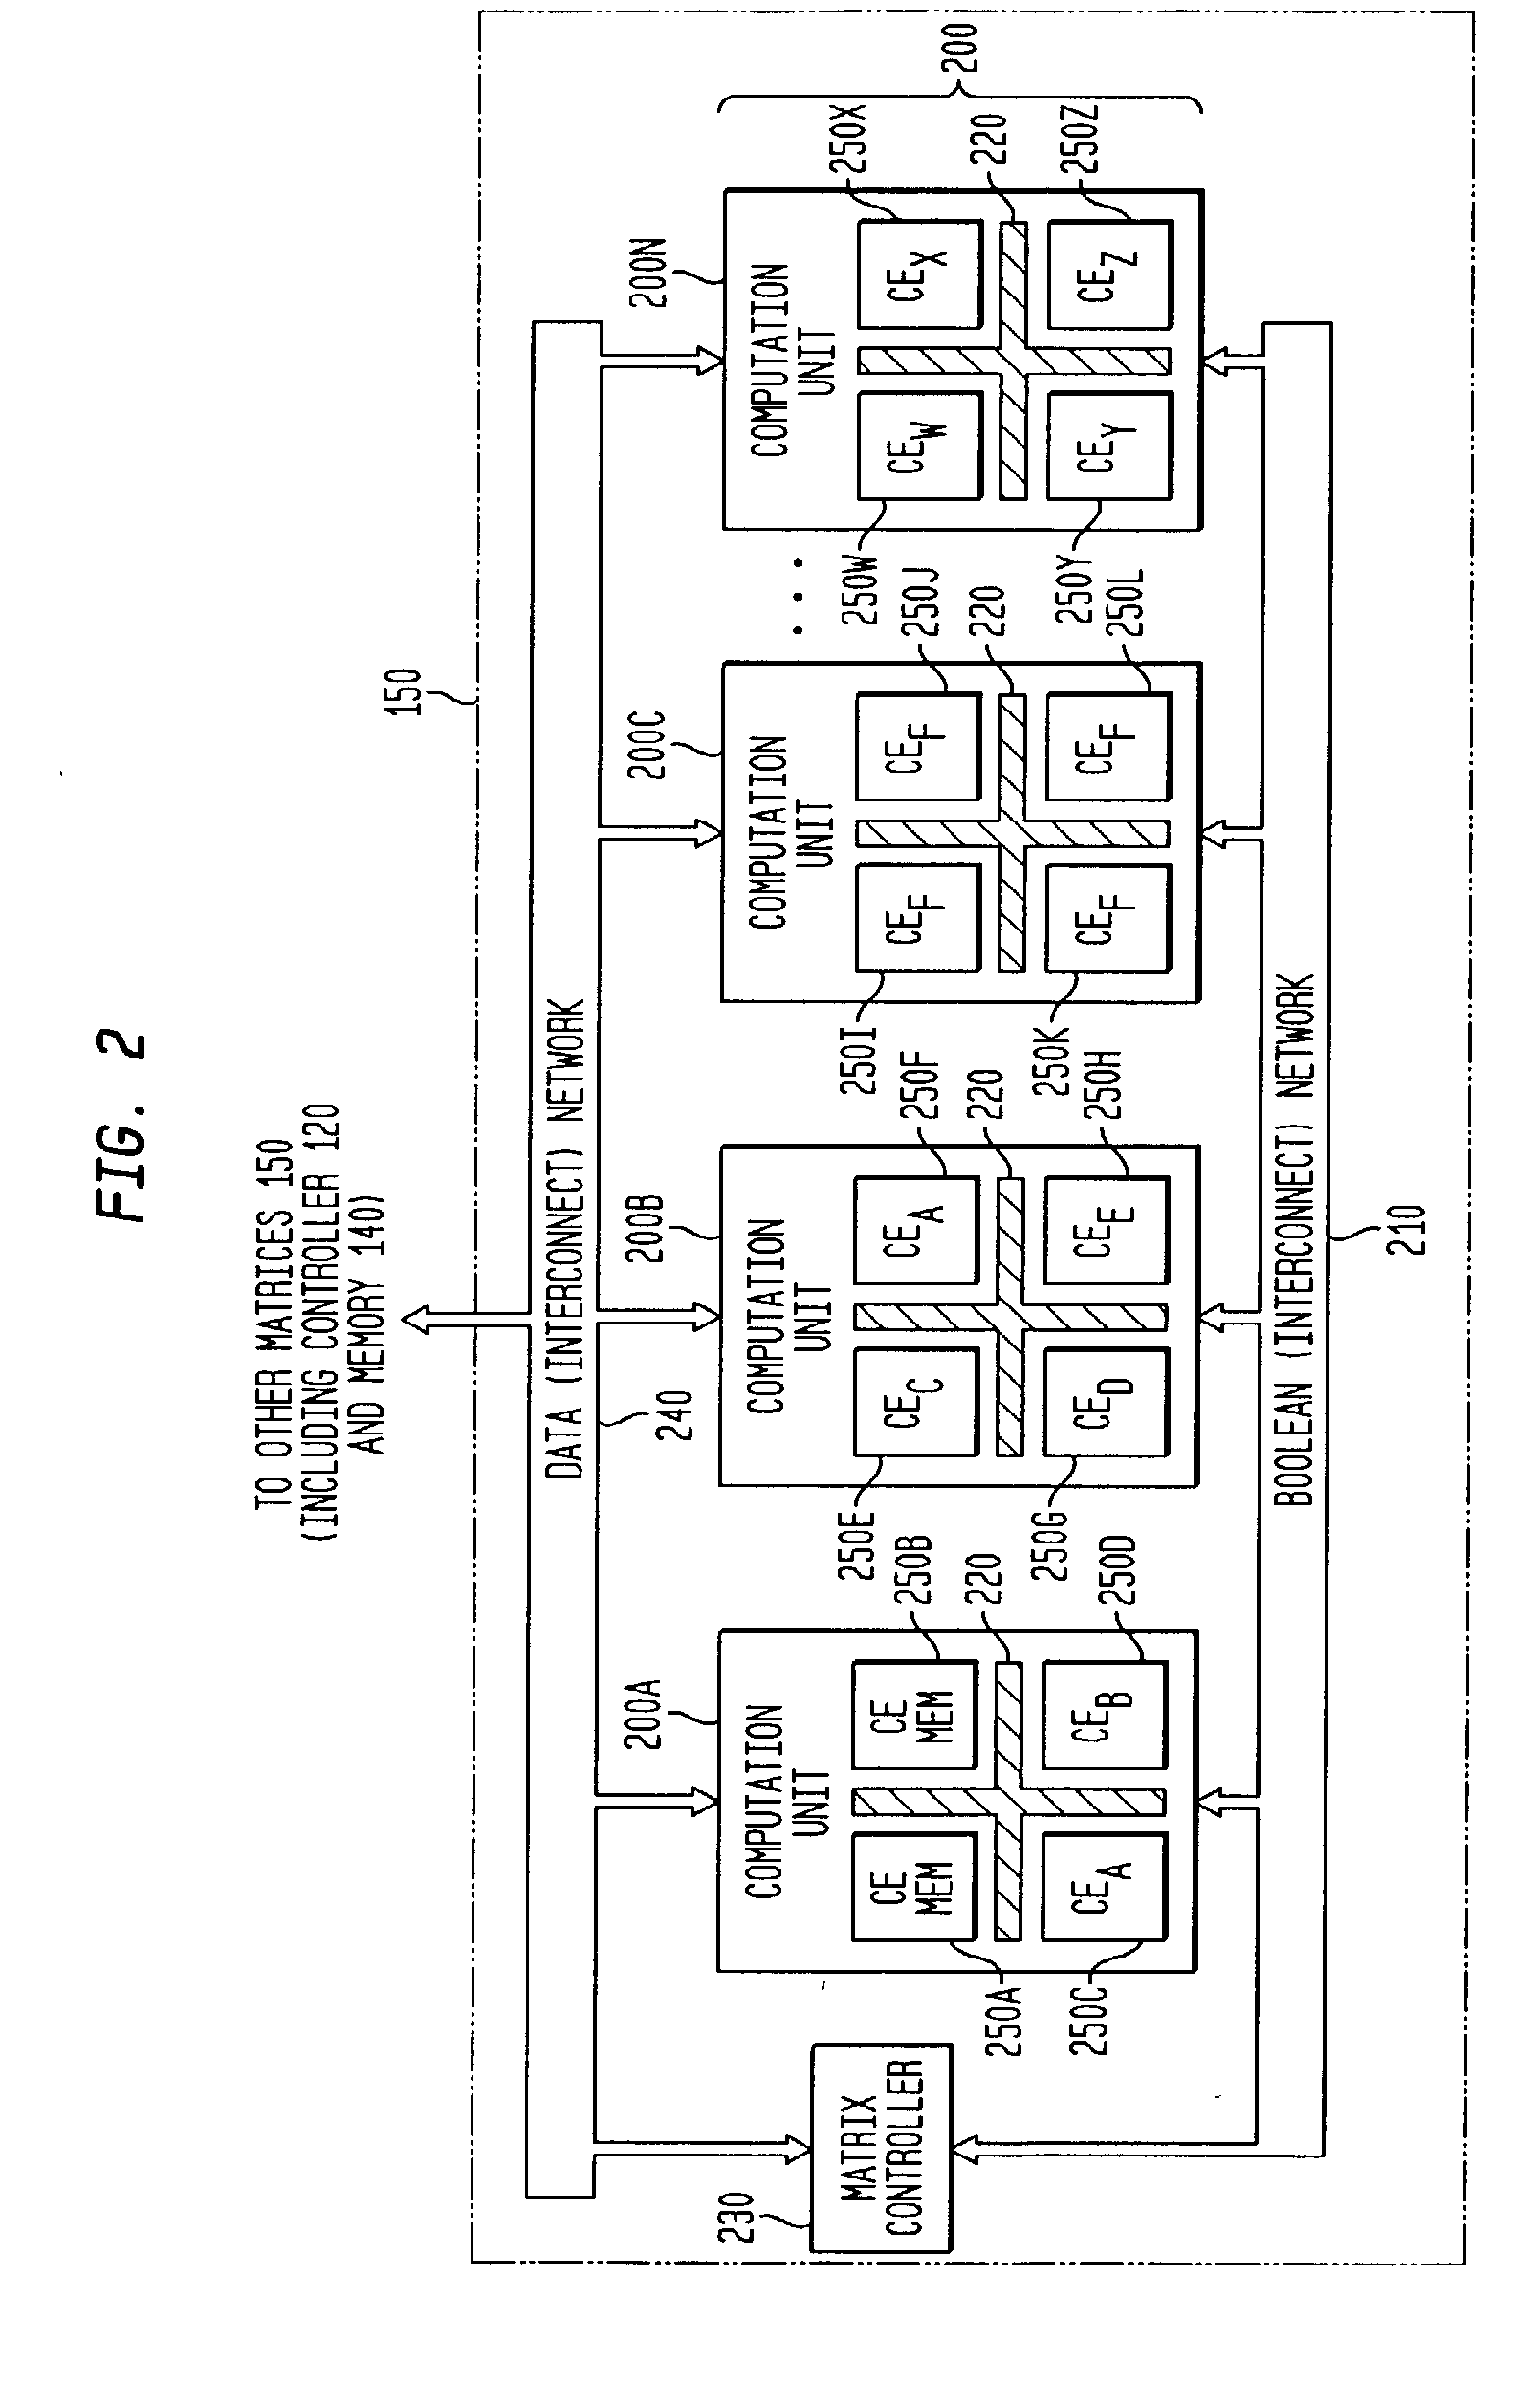 Method, System and Program for Developing and Scheduling Adaptive Integrated Circuitry and Corresponding Control or Configuration Information